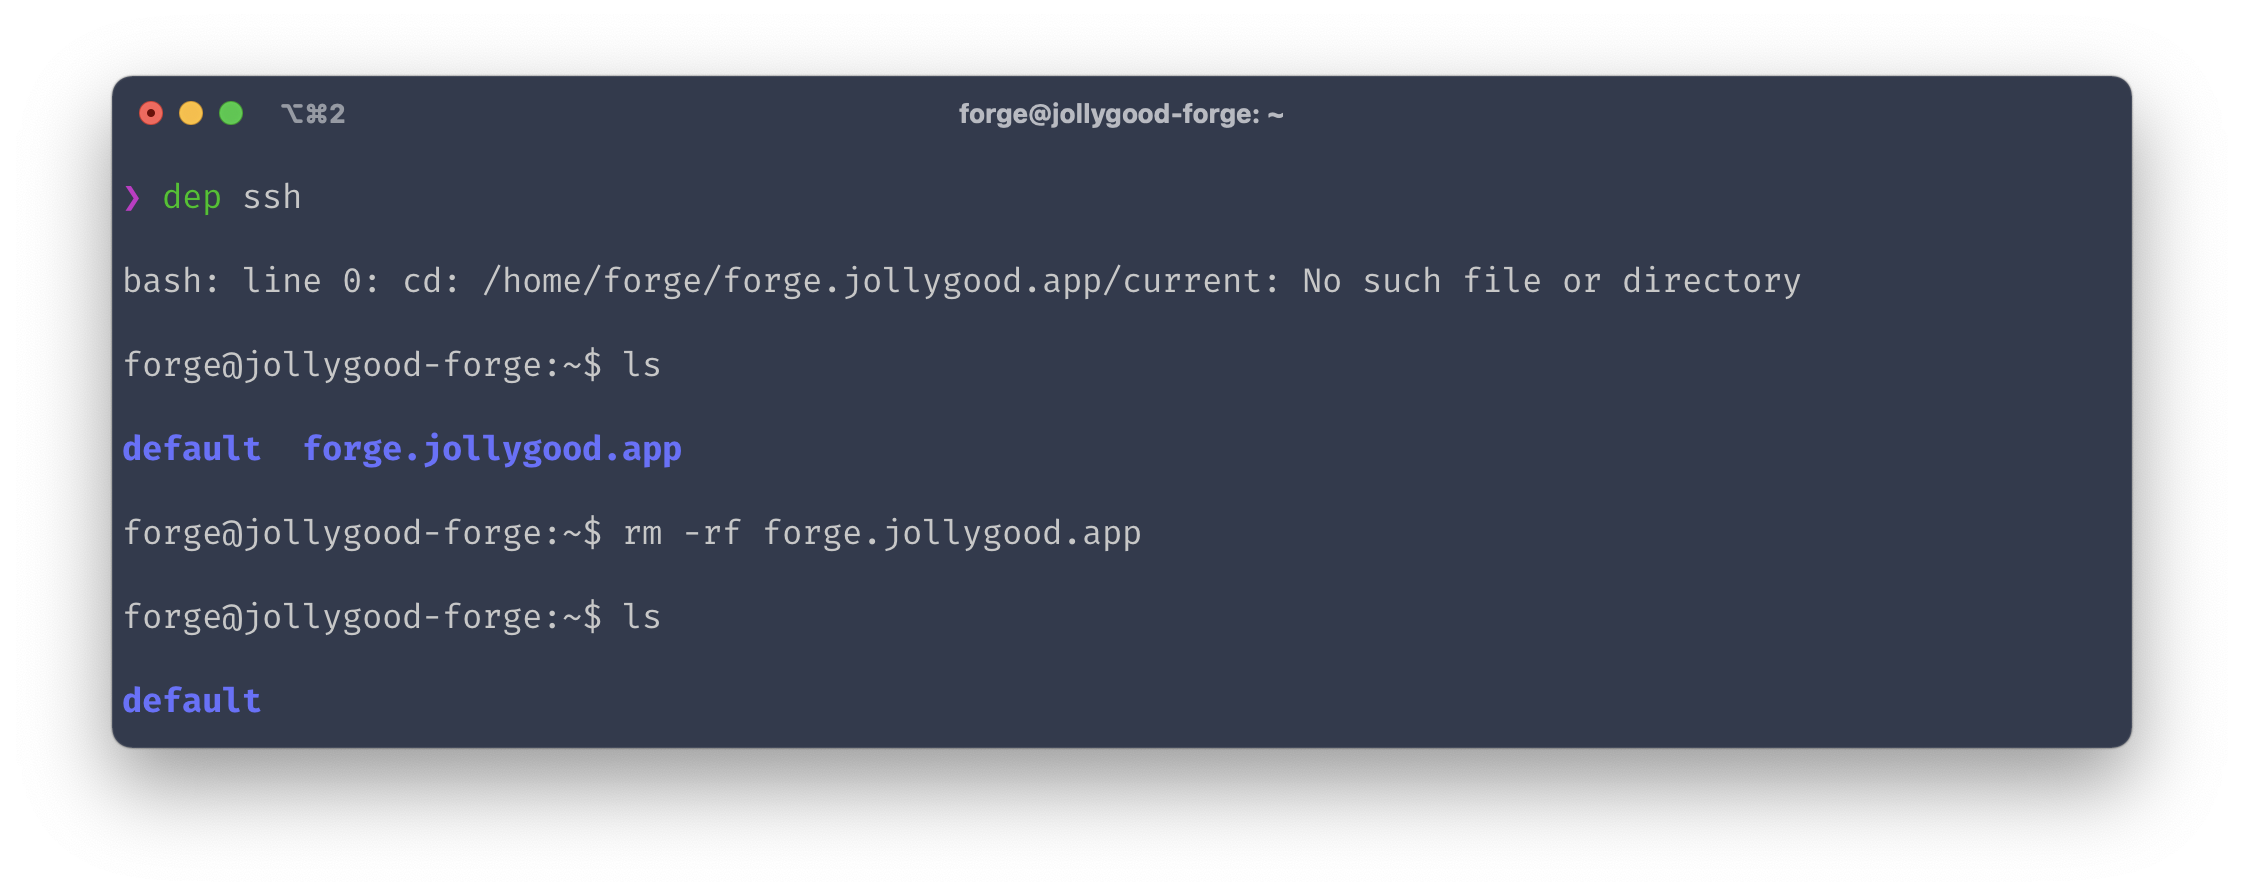 Screenshot of the terminal output of "dep ssh", "ls", "rm -rf forge.jollygood.app", "ls".